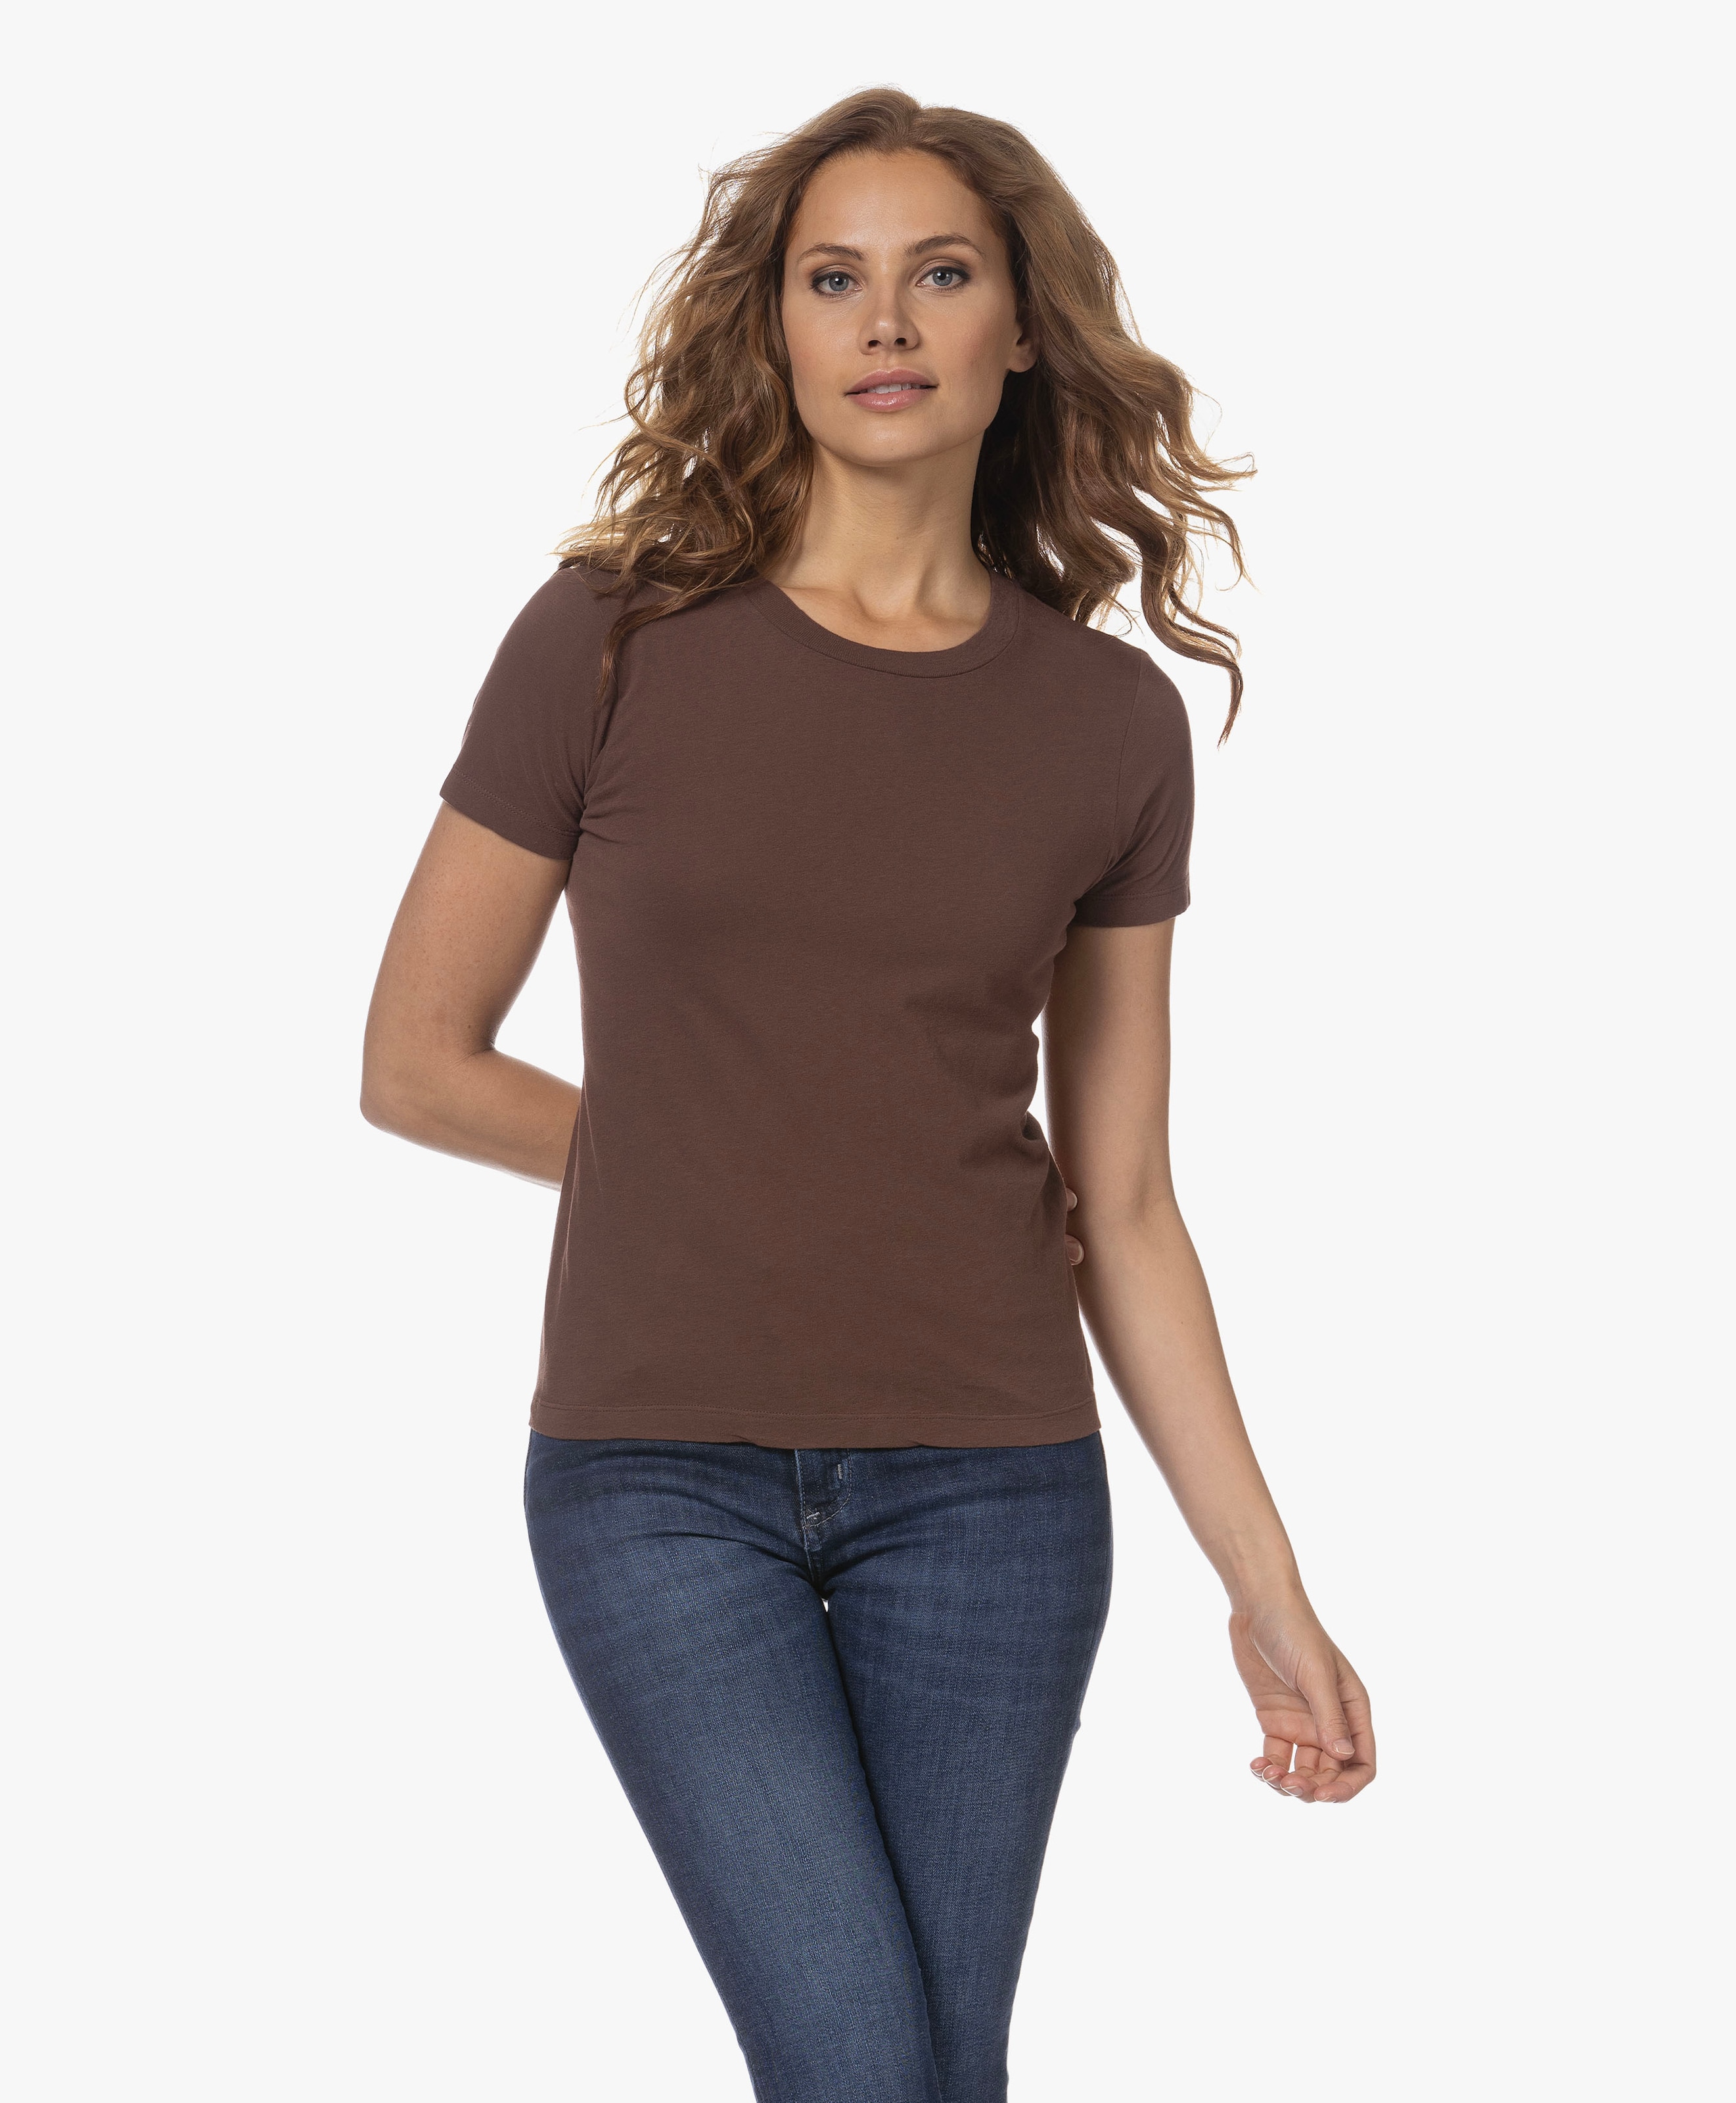 Gamipy Brushed Jersey T-shirt